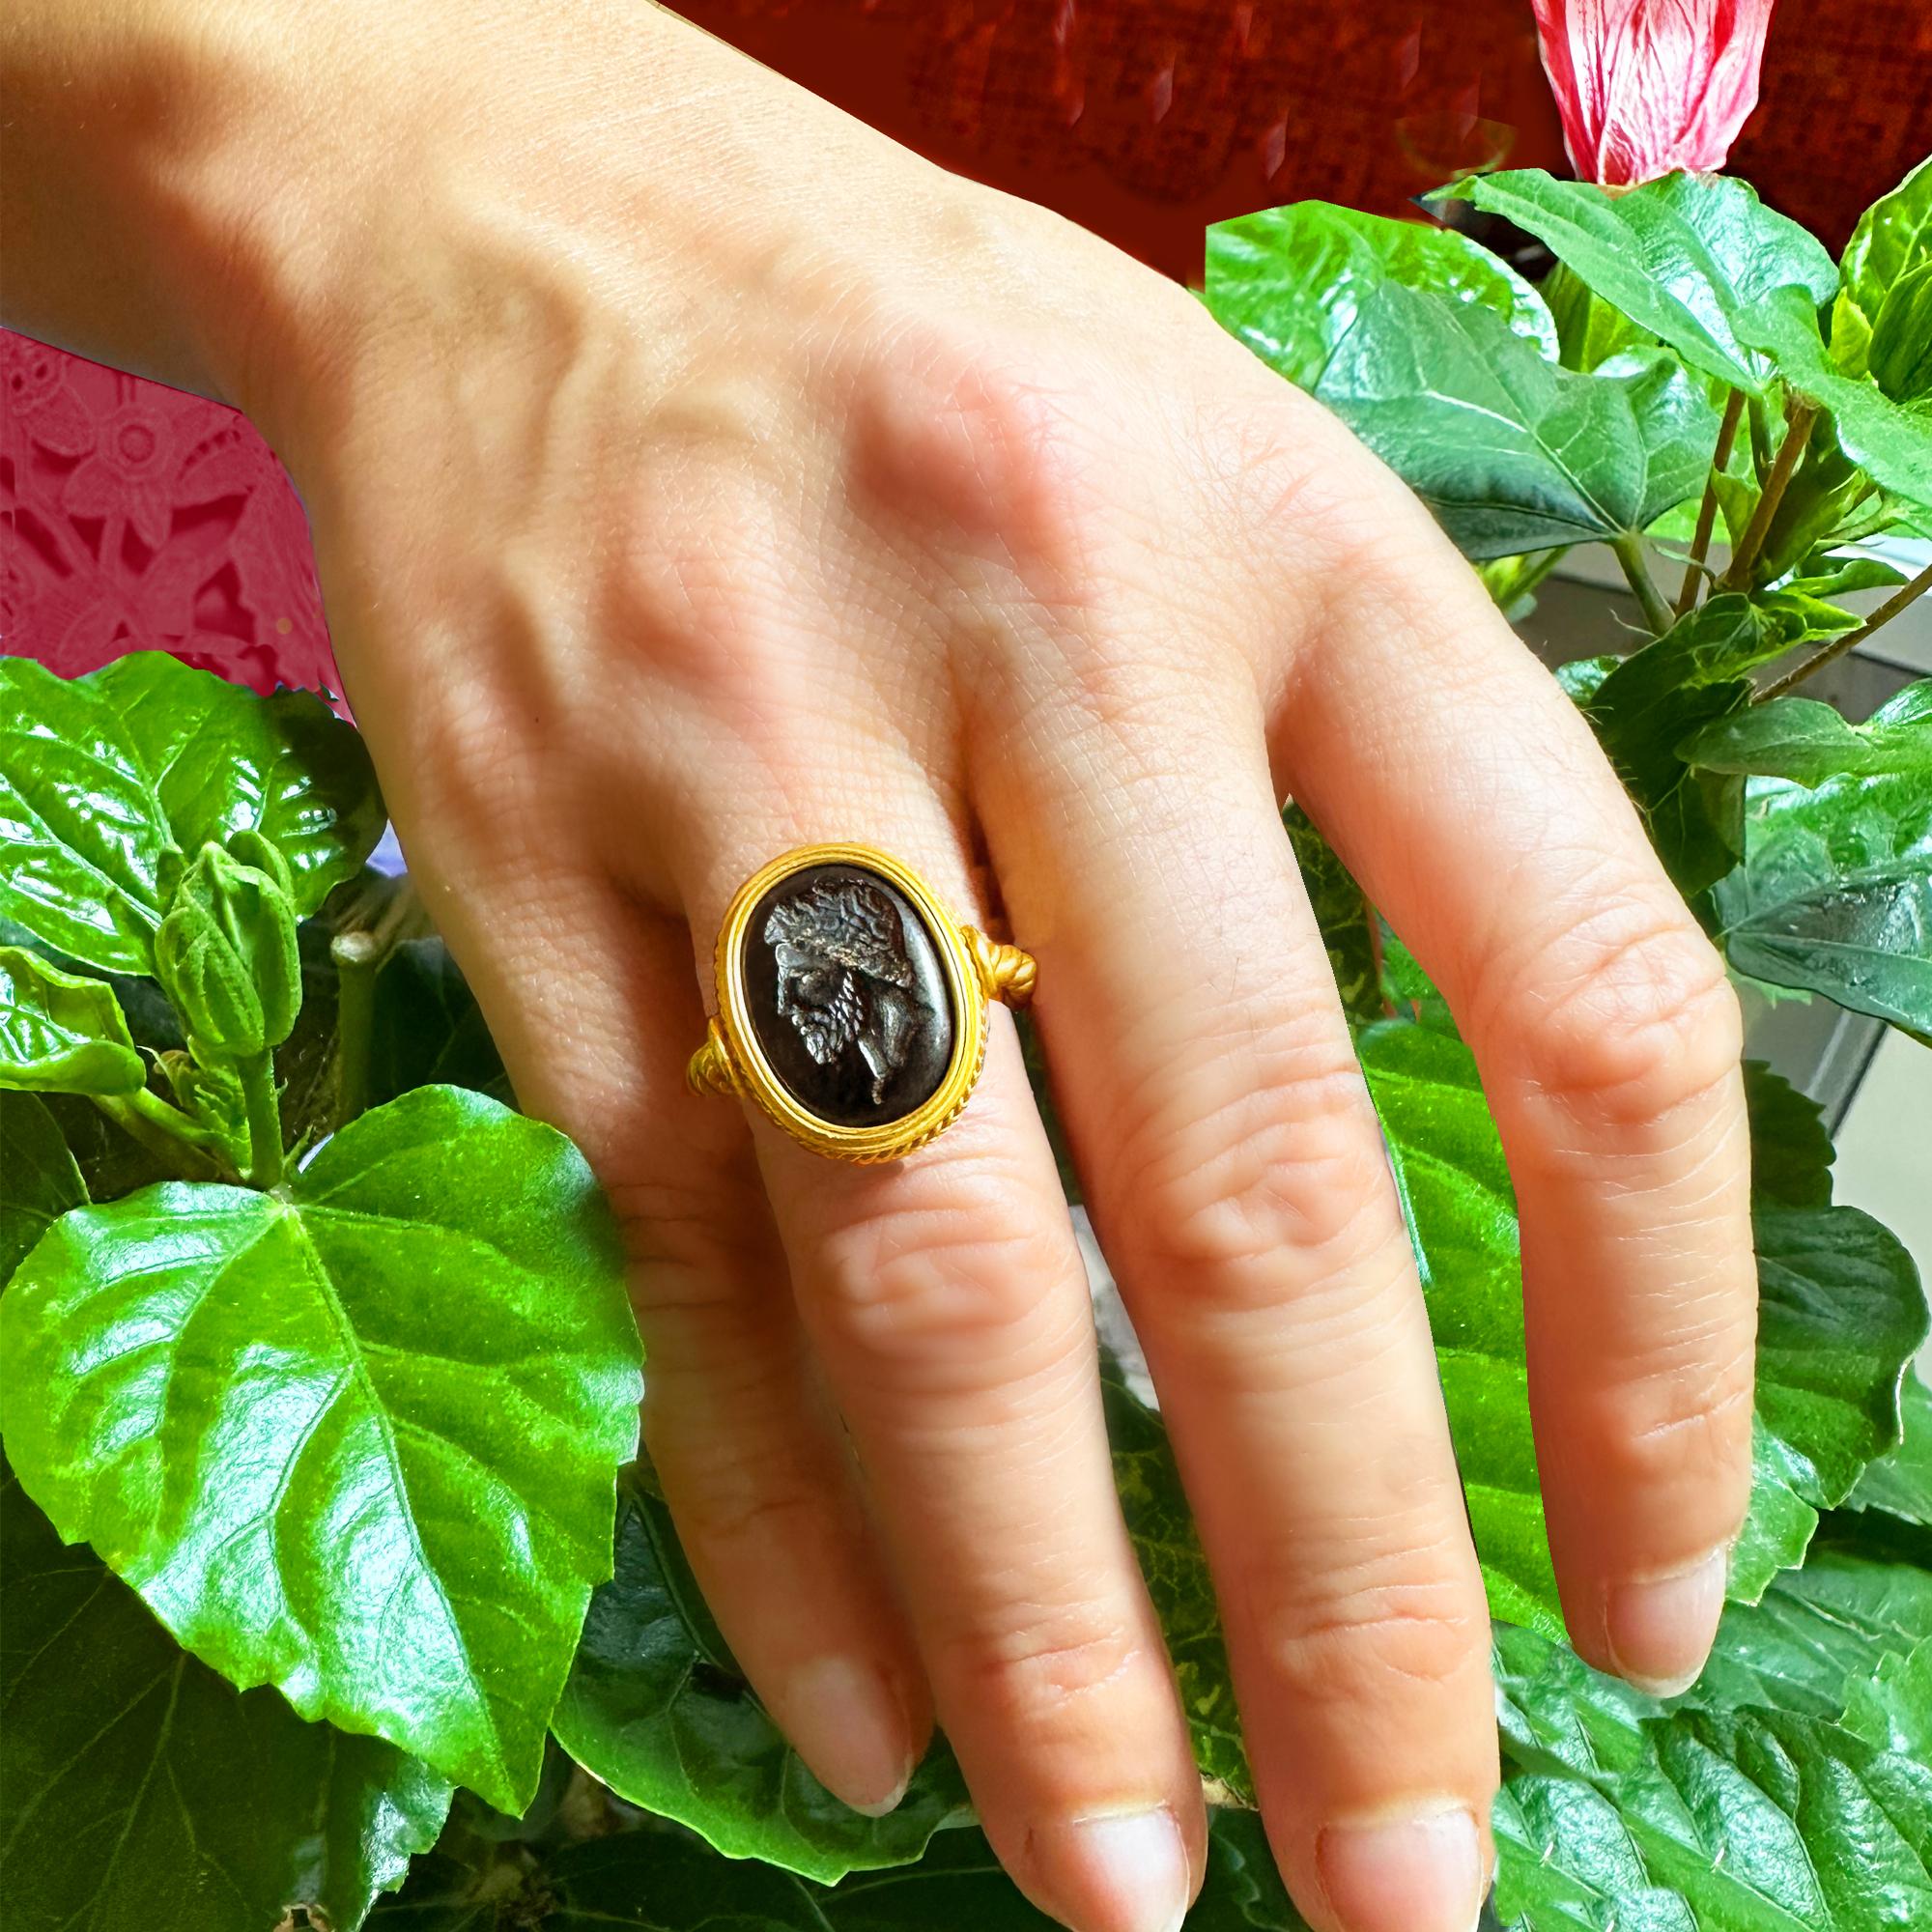 In this 18 Kt gold ring handmade by our skilled goldsmiths, an authentic Roman intaglio (I-II century AD) on Heliotrope has been set, which depicts the Emperor Septimius Severus.
Glyptics, the 